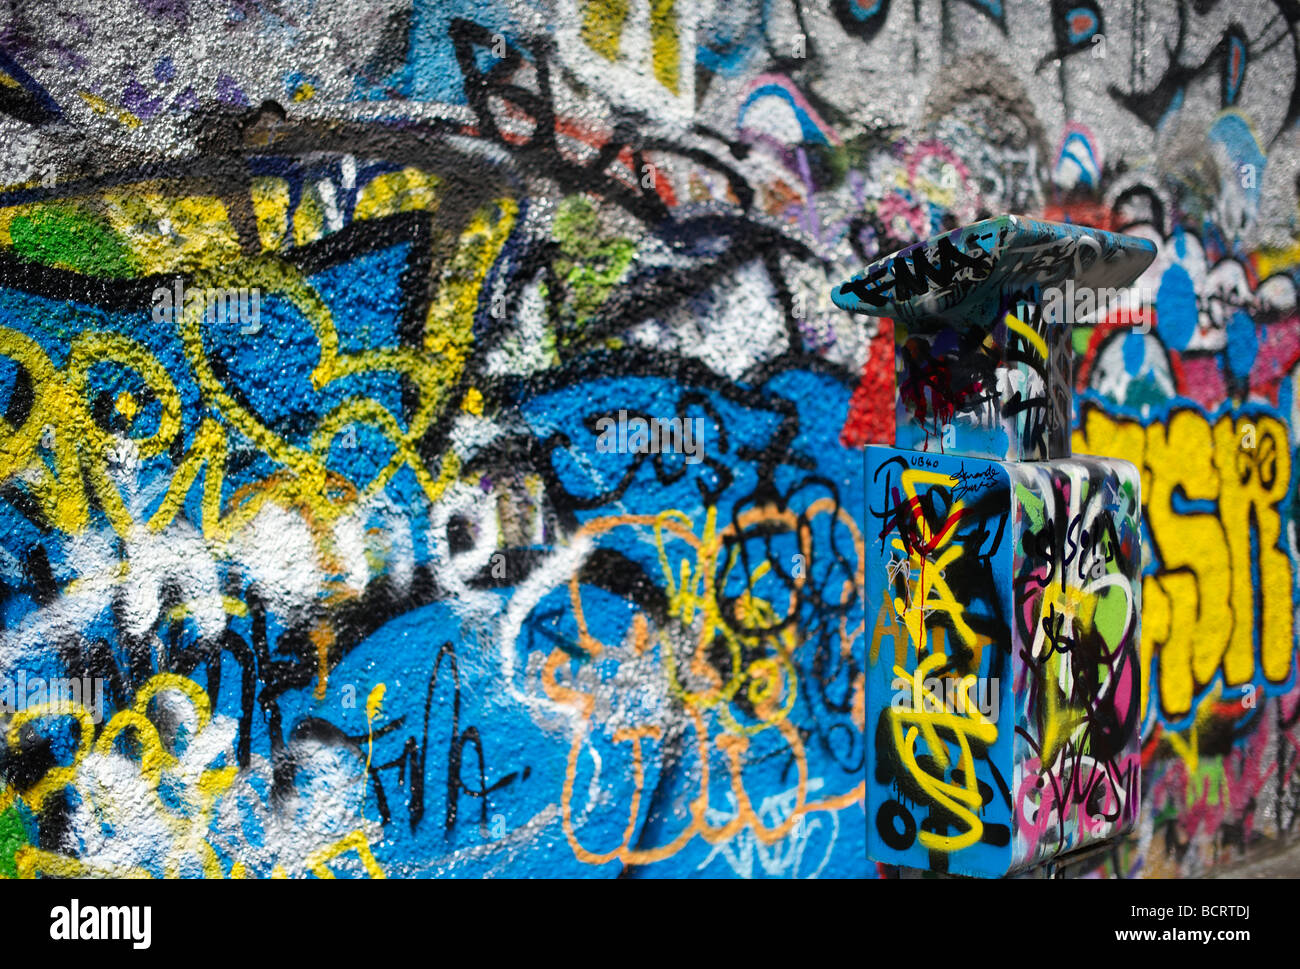 Parking meter covered in graffiti along with Wall, Windmill Lane Dublin Ireland Stock Photo